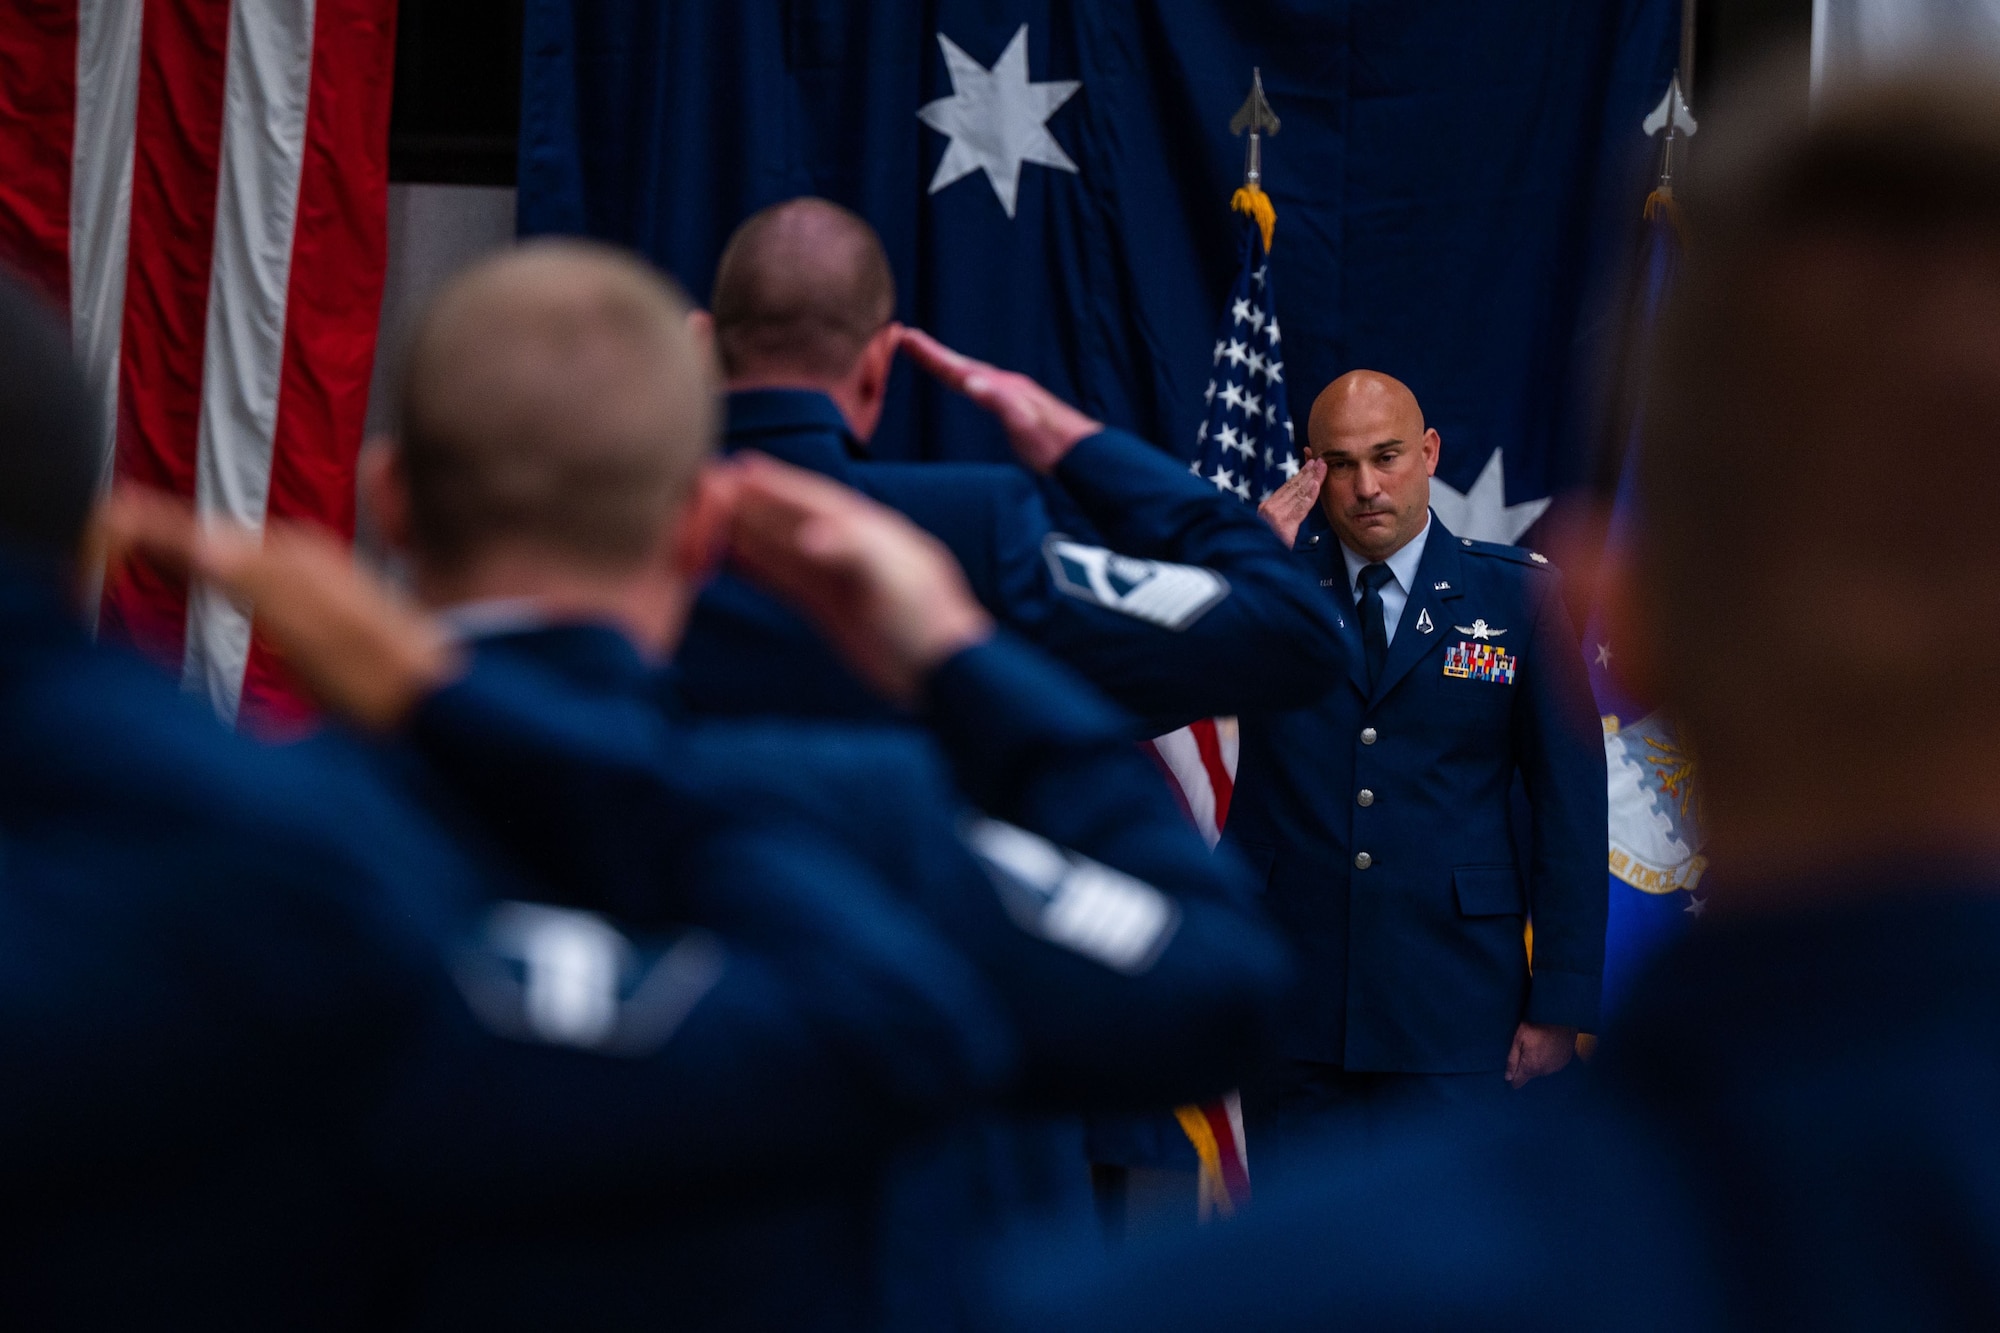 U.S. Space Force Lt. Col. Jacob Majewski, incoming 65th Cyberspace Squadron commander, renders his first salute to his unit as commander during a change of command ceremony at Vandenberg Space Force Base, Calif., July 21, 2023. (U.S. Space Force photo by Tech. Sgt. Luke Kitterman)